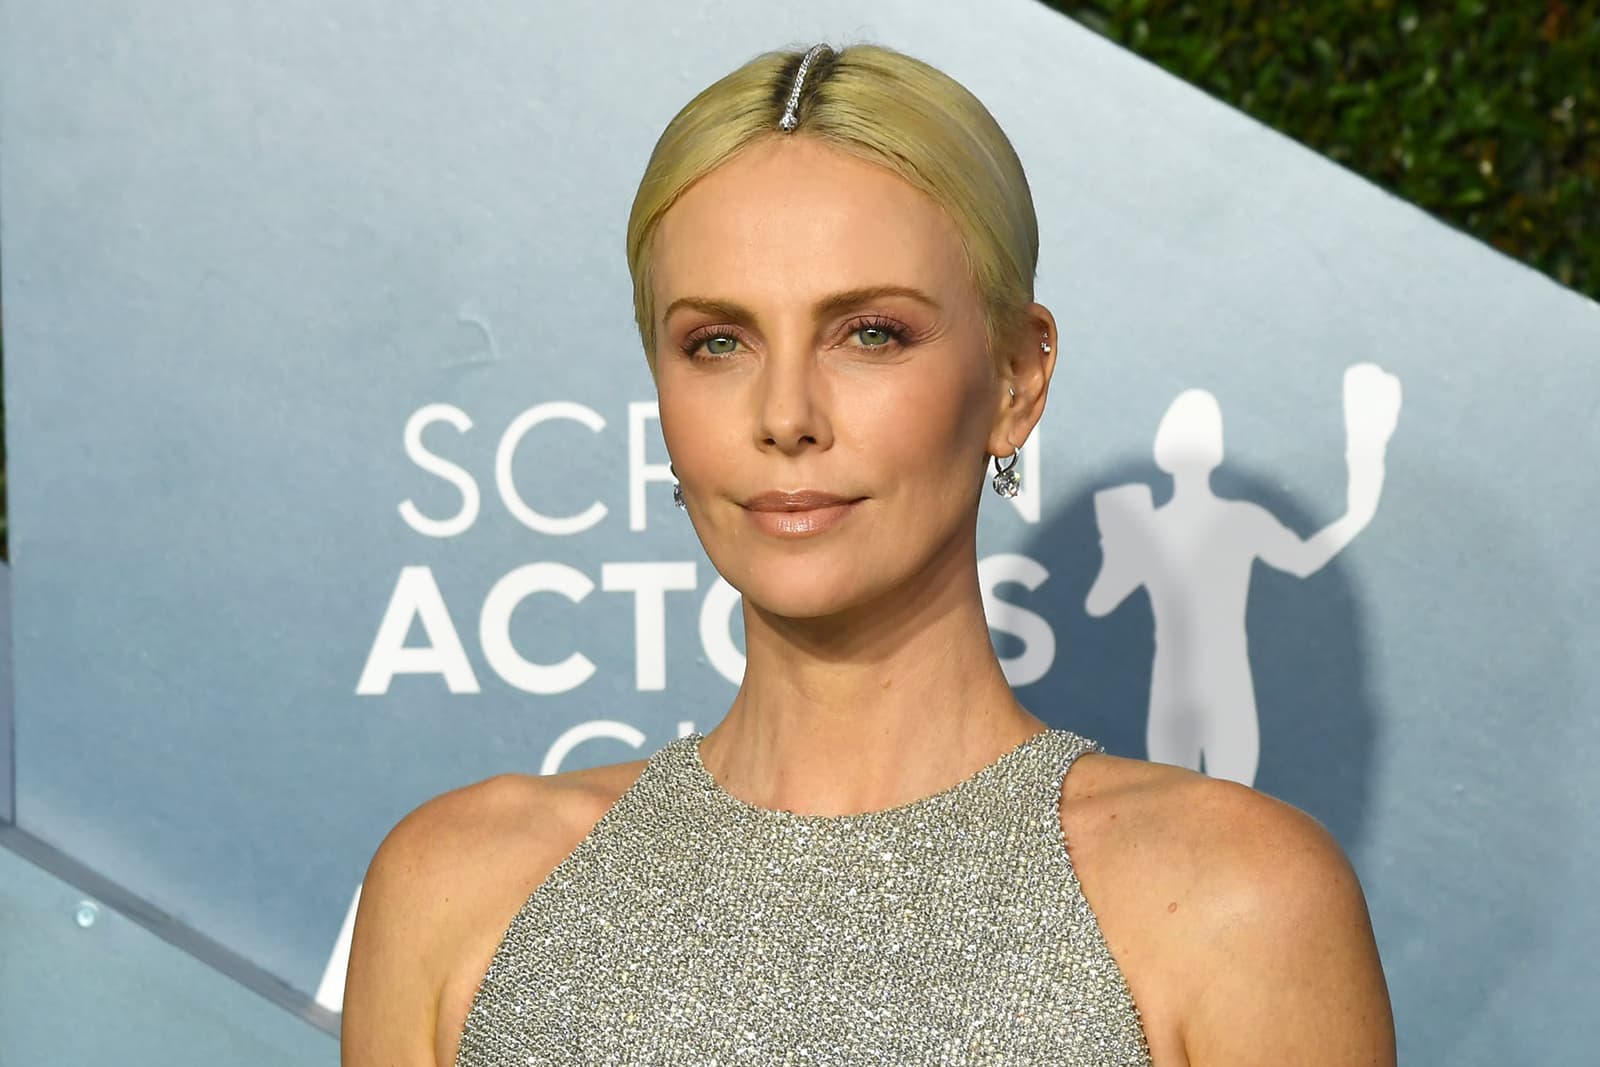 Charlize Theron wearing a Tiffany & Co. bracelet with 3ct diamonds a hair accessory, and earrings with diamonds